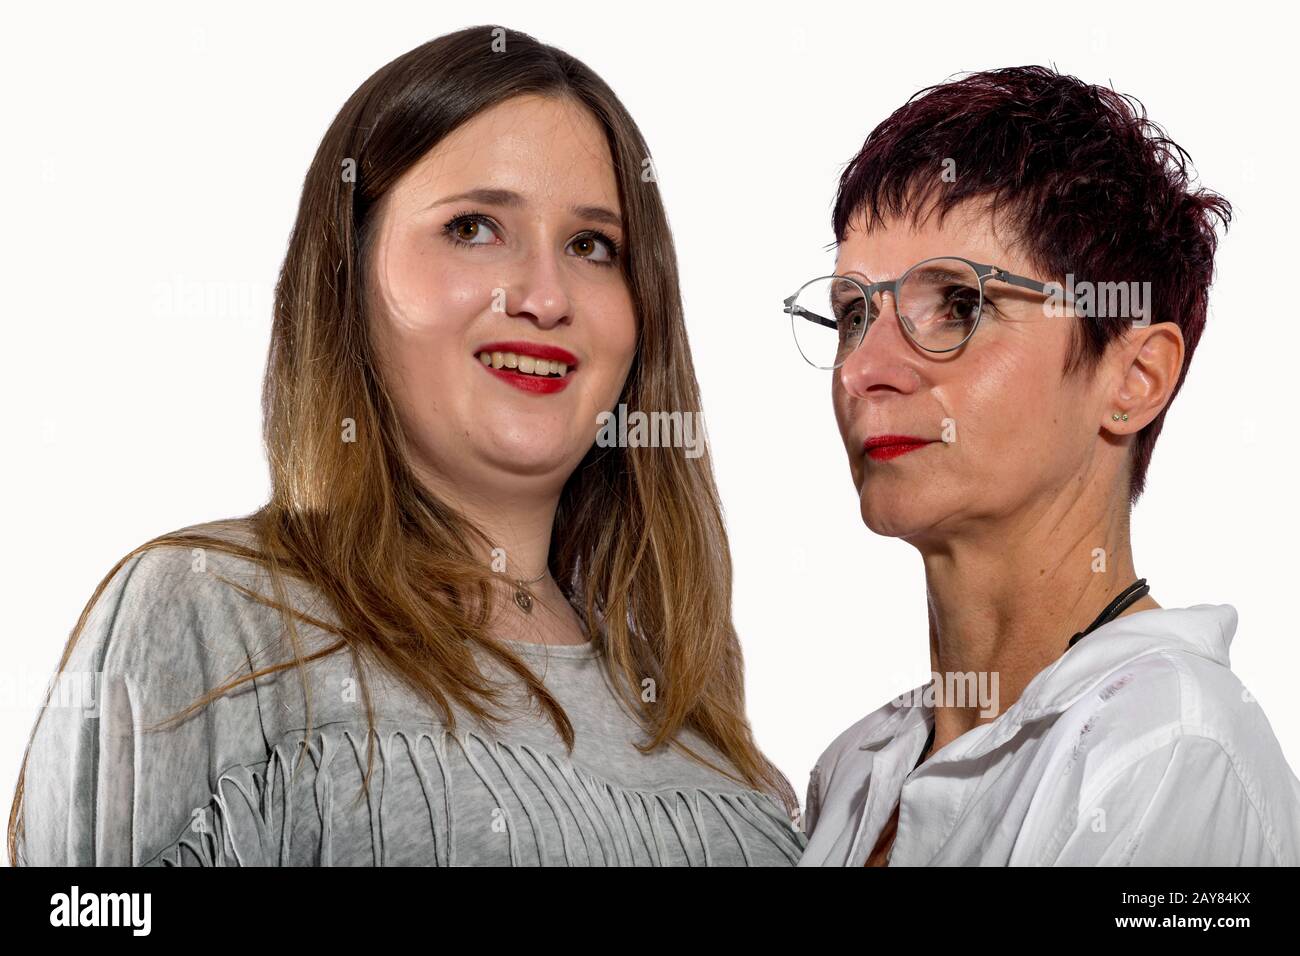 Portrait of two women standing side by side Stock Photo